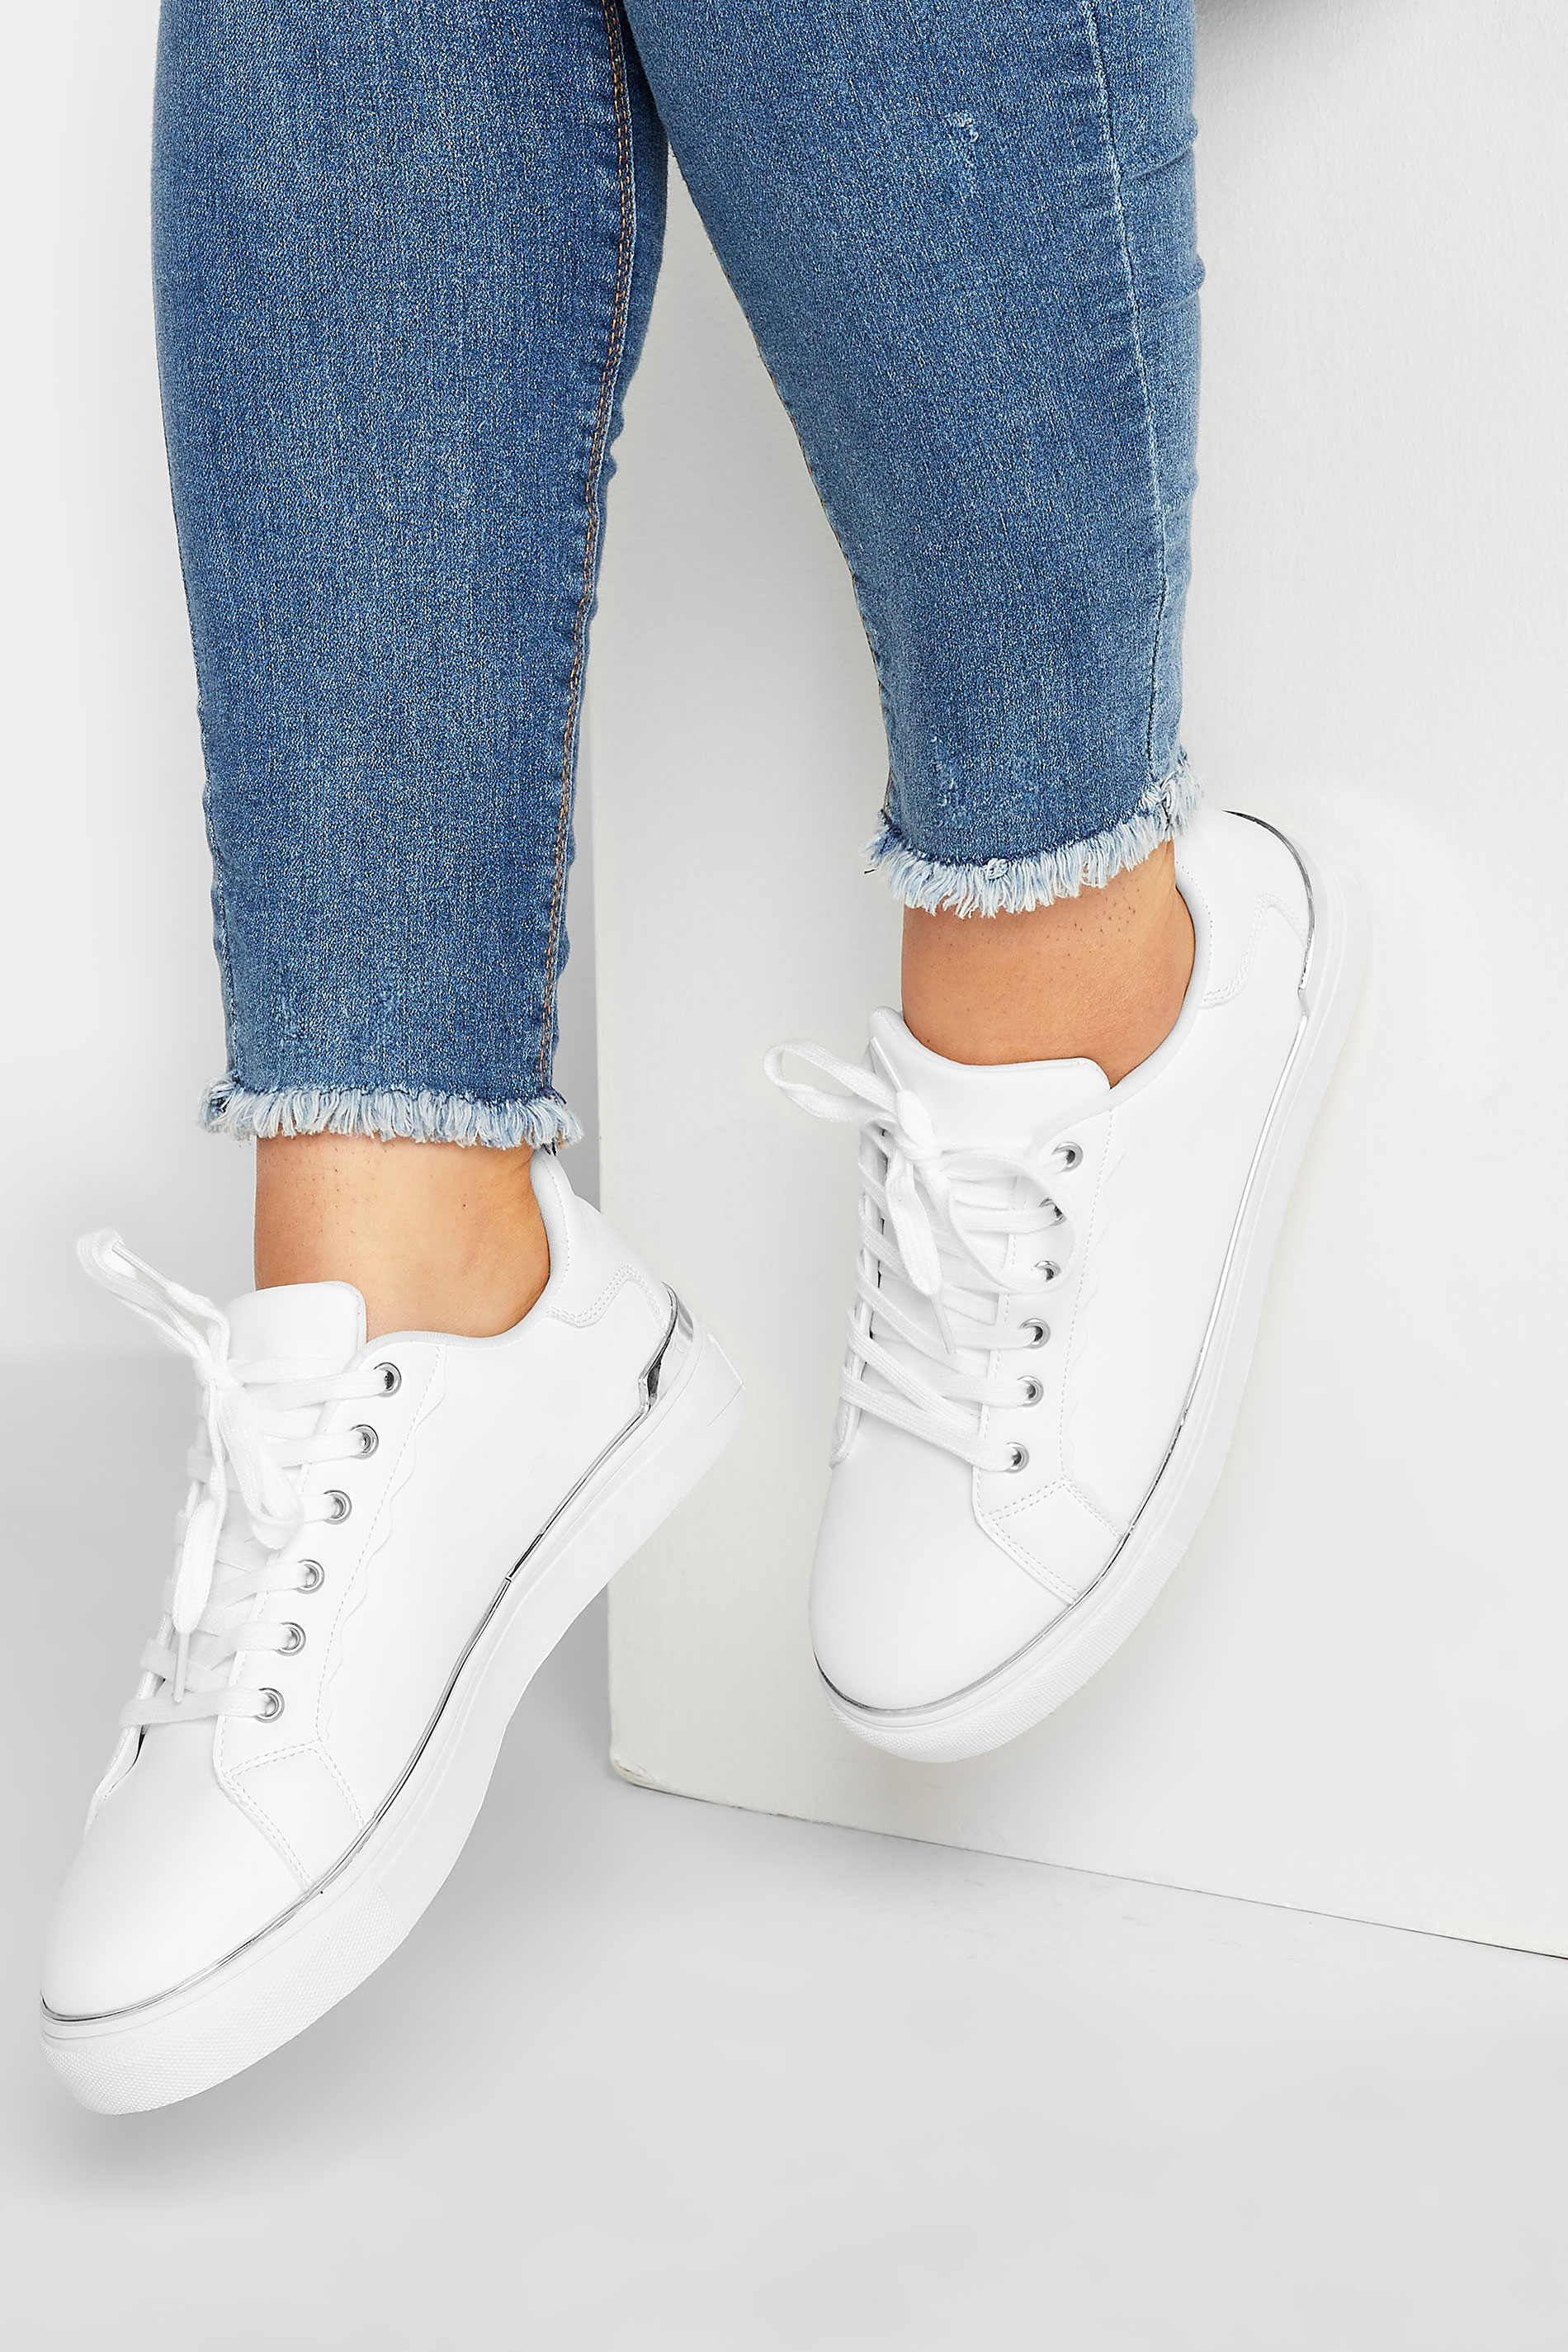 Beschrijven over Voorspeller White & Silver Hardware Scallop Trainers In Extra Wide EEE Fit | Yours  Clothing